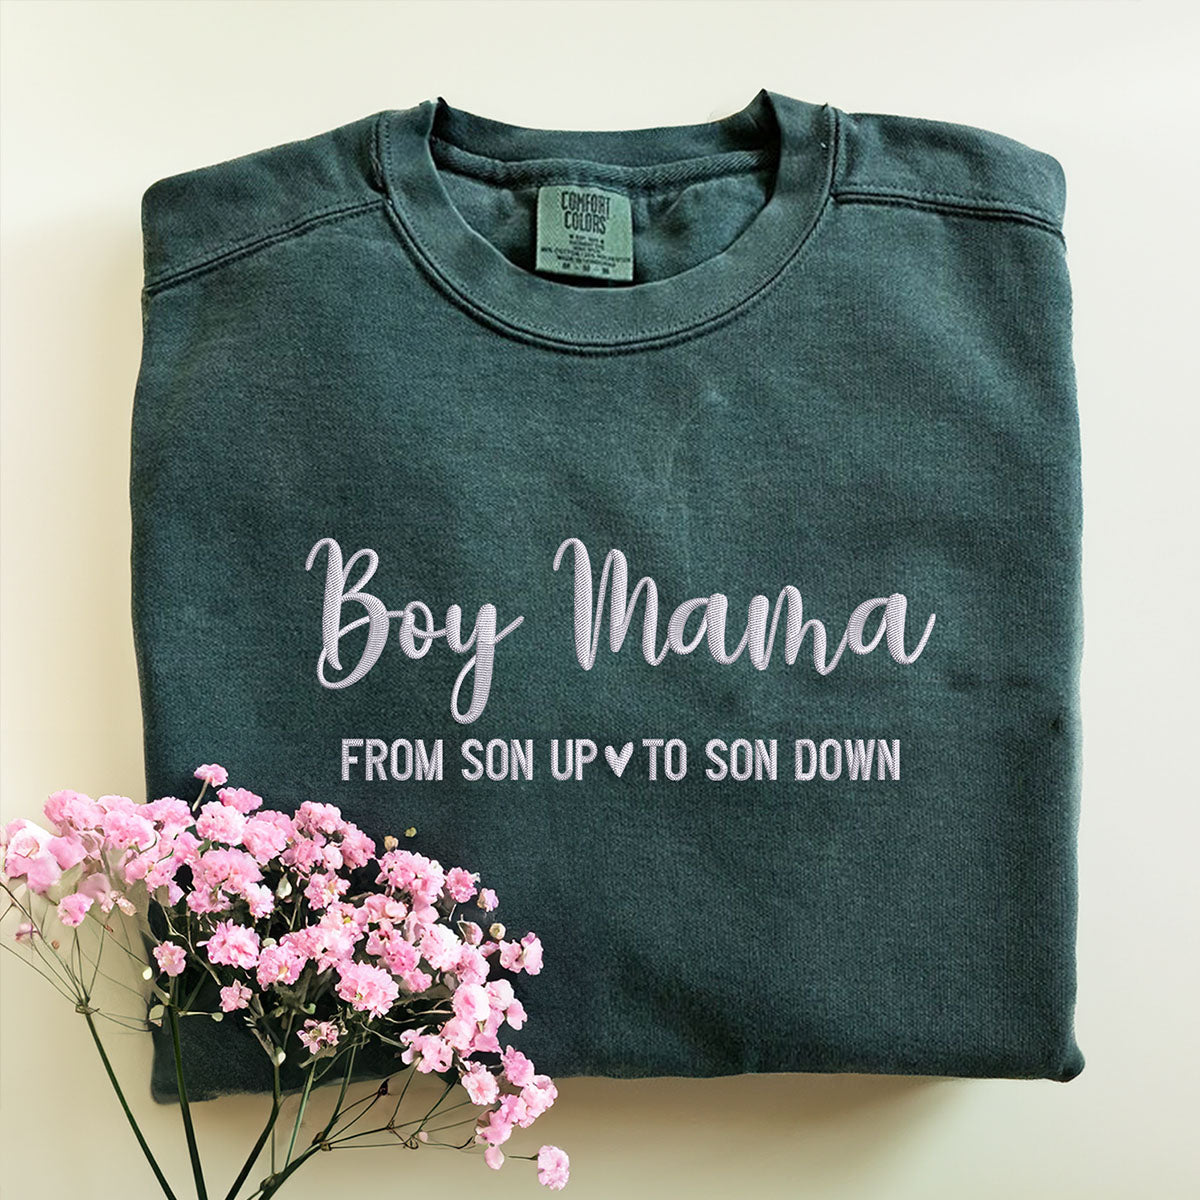 Boy Mama from Son up to Son Down crewneck